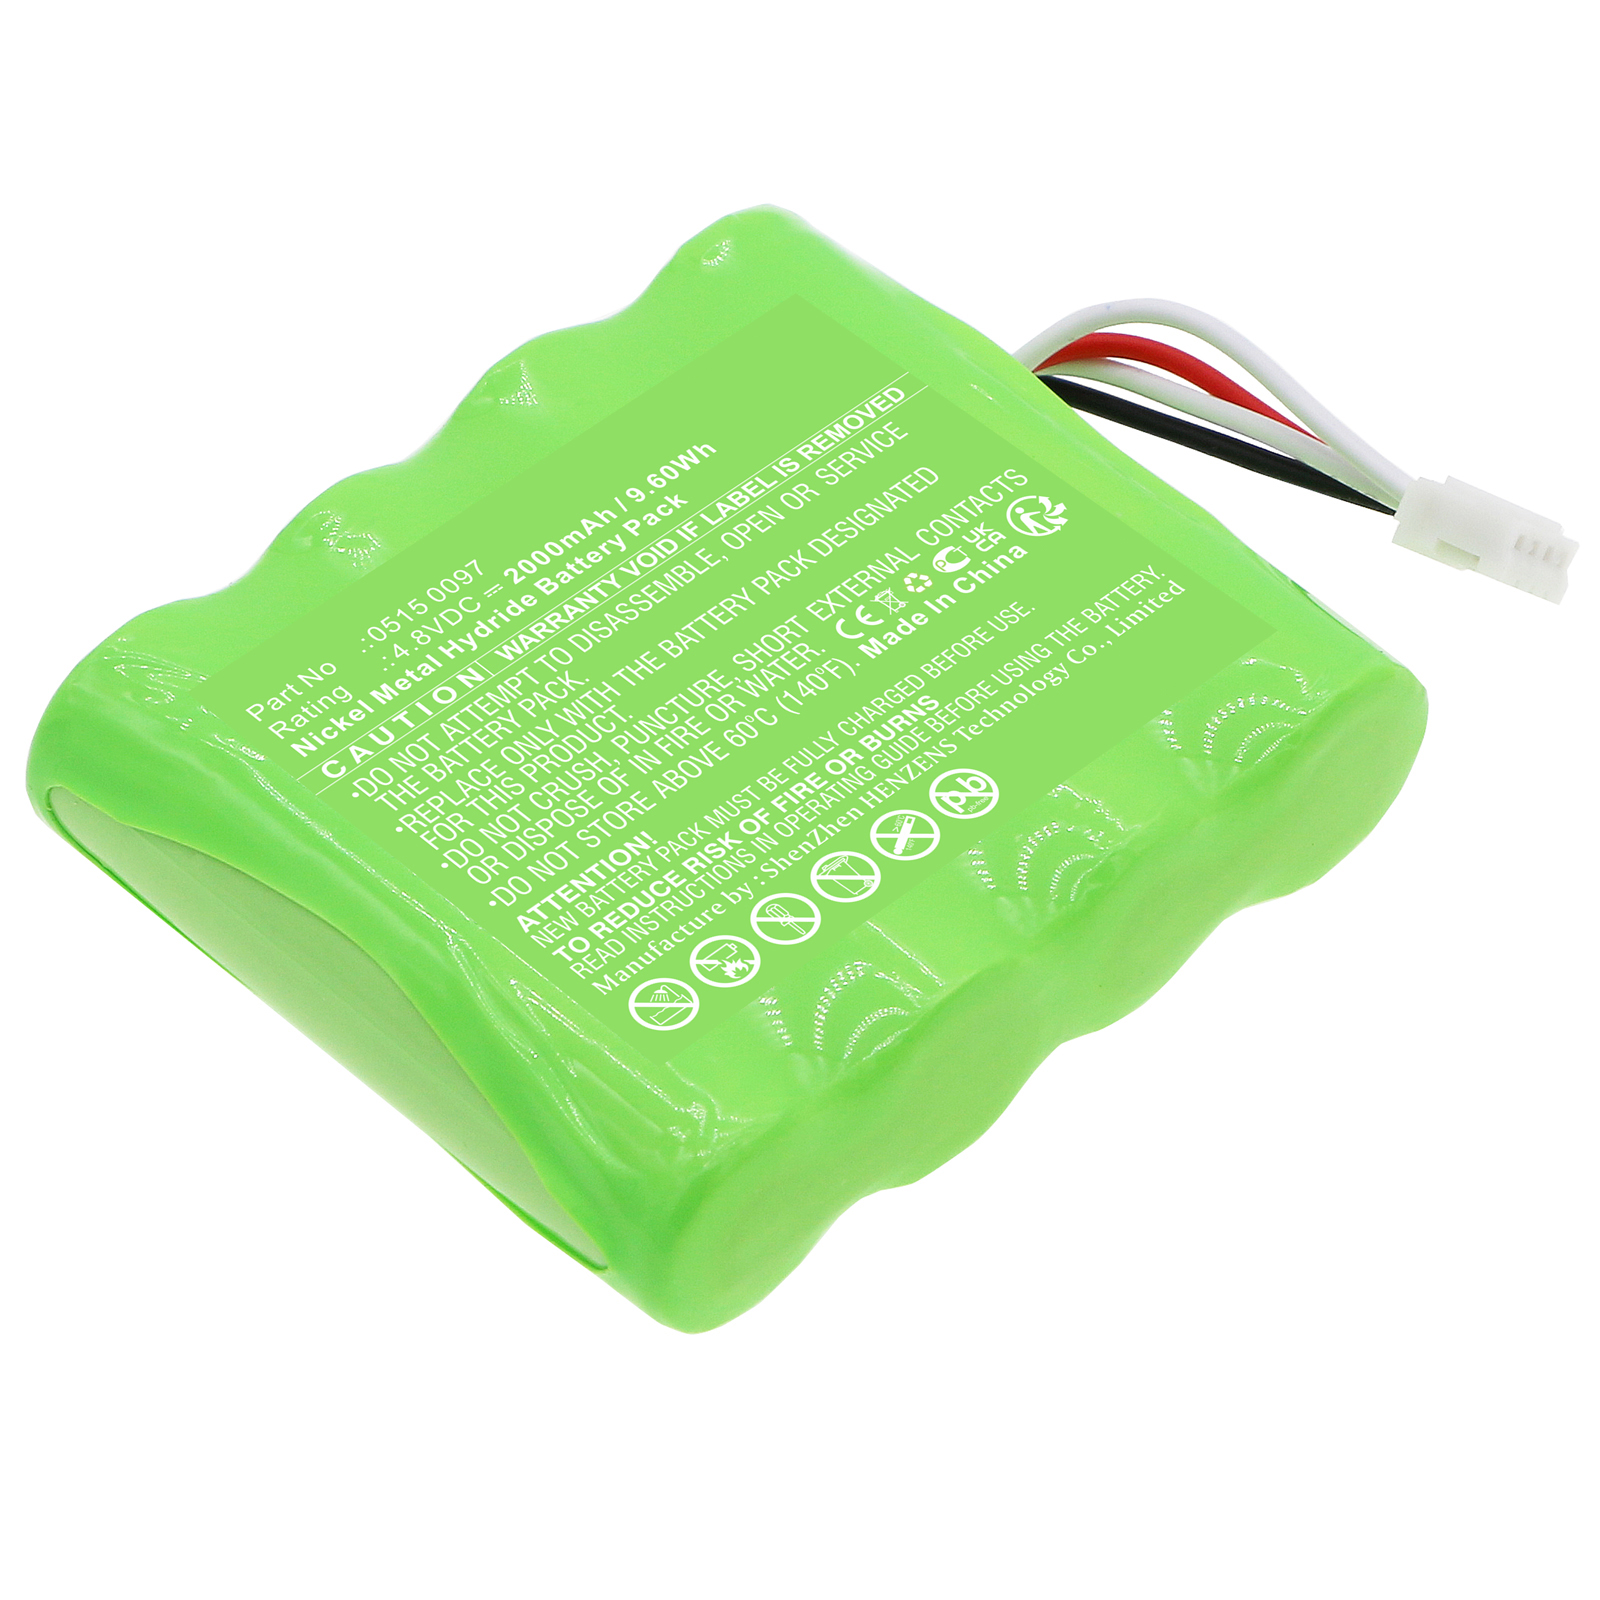 Synergy Digital Equipment Battery, Compatible with Testo 0515 0097 Equipment Battery (Ni-MH, 4.8V, 2000mAh)